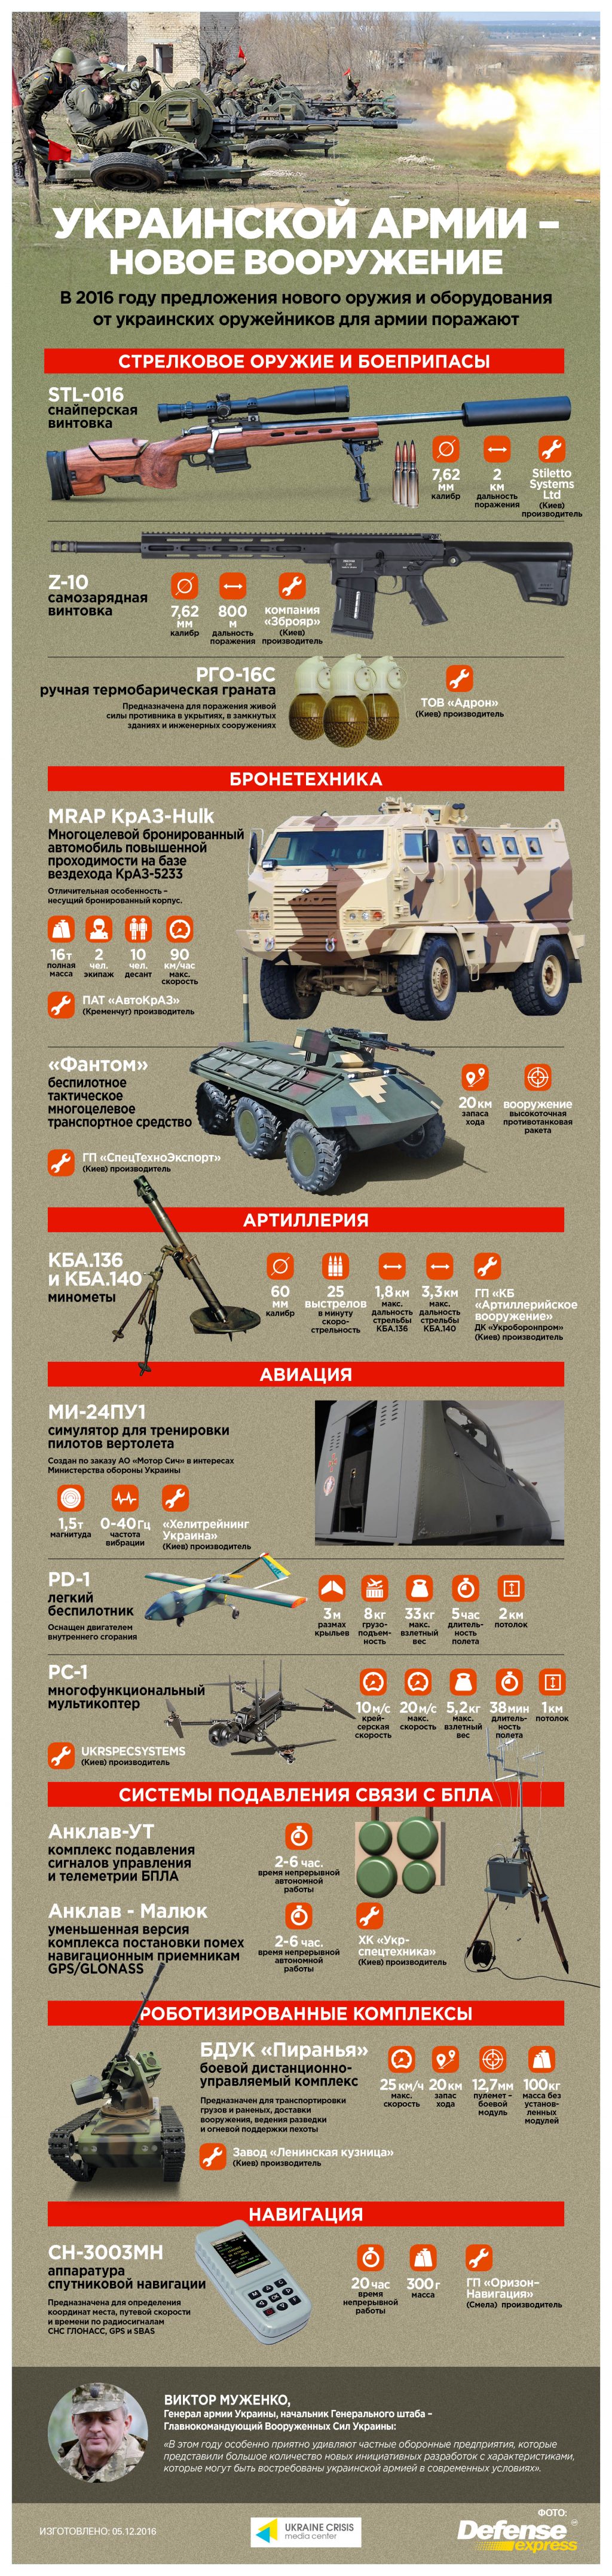 weapon-rus-05